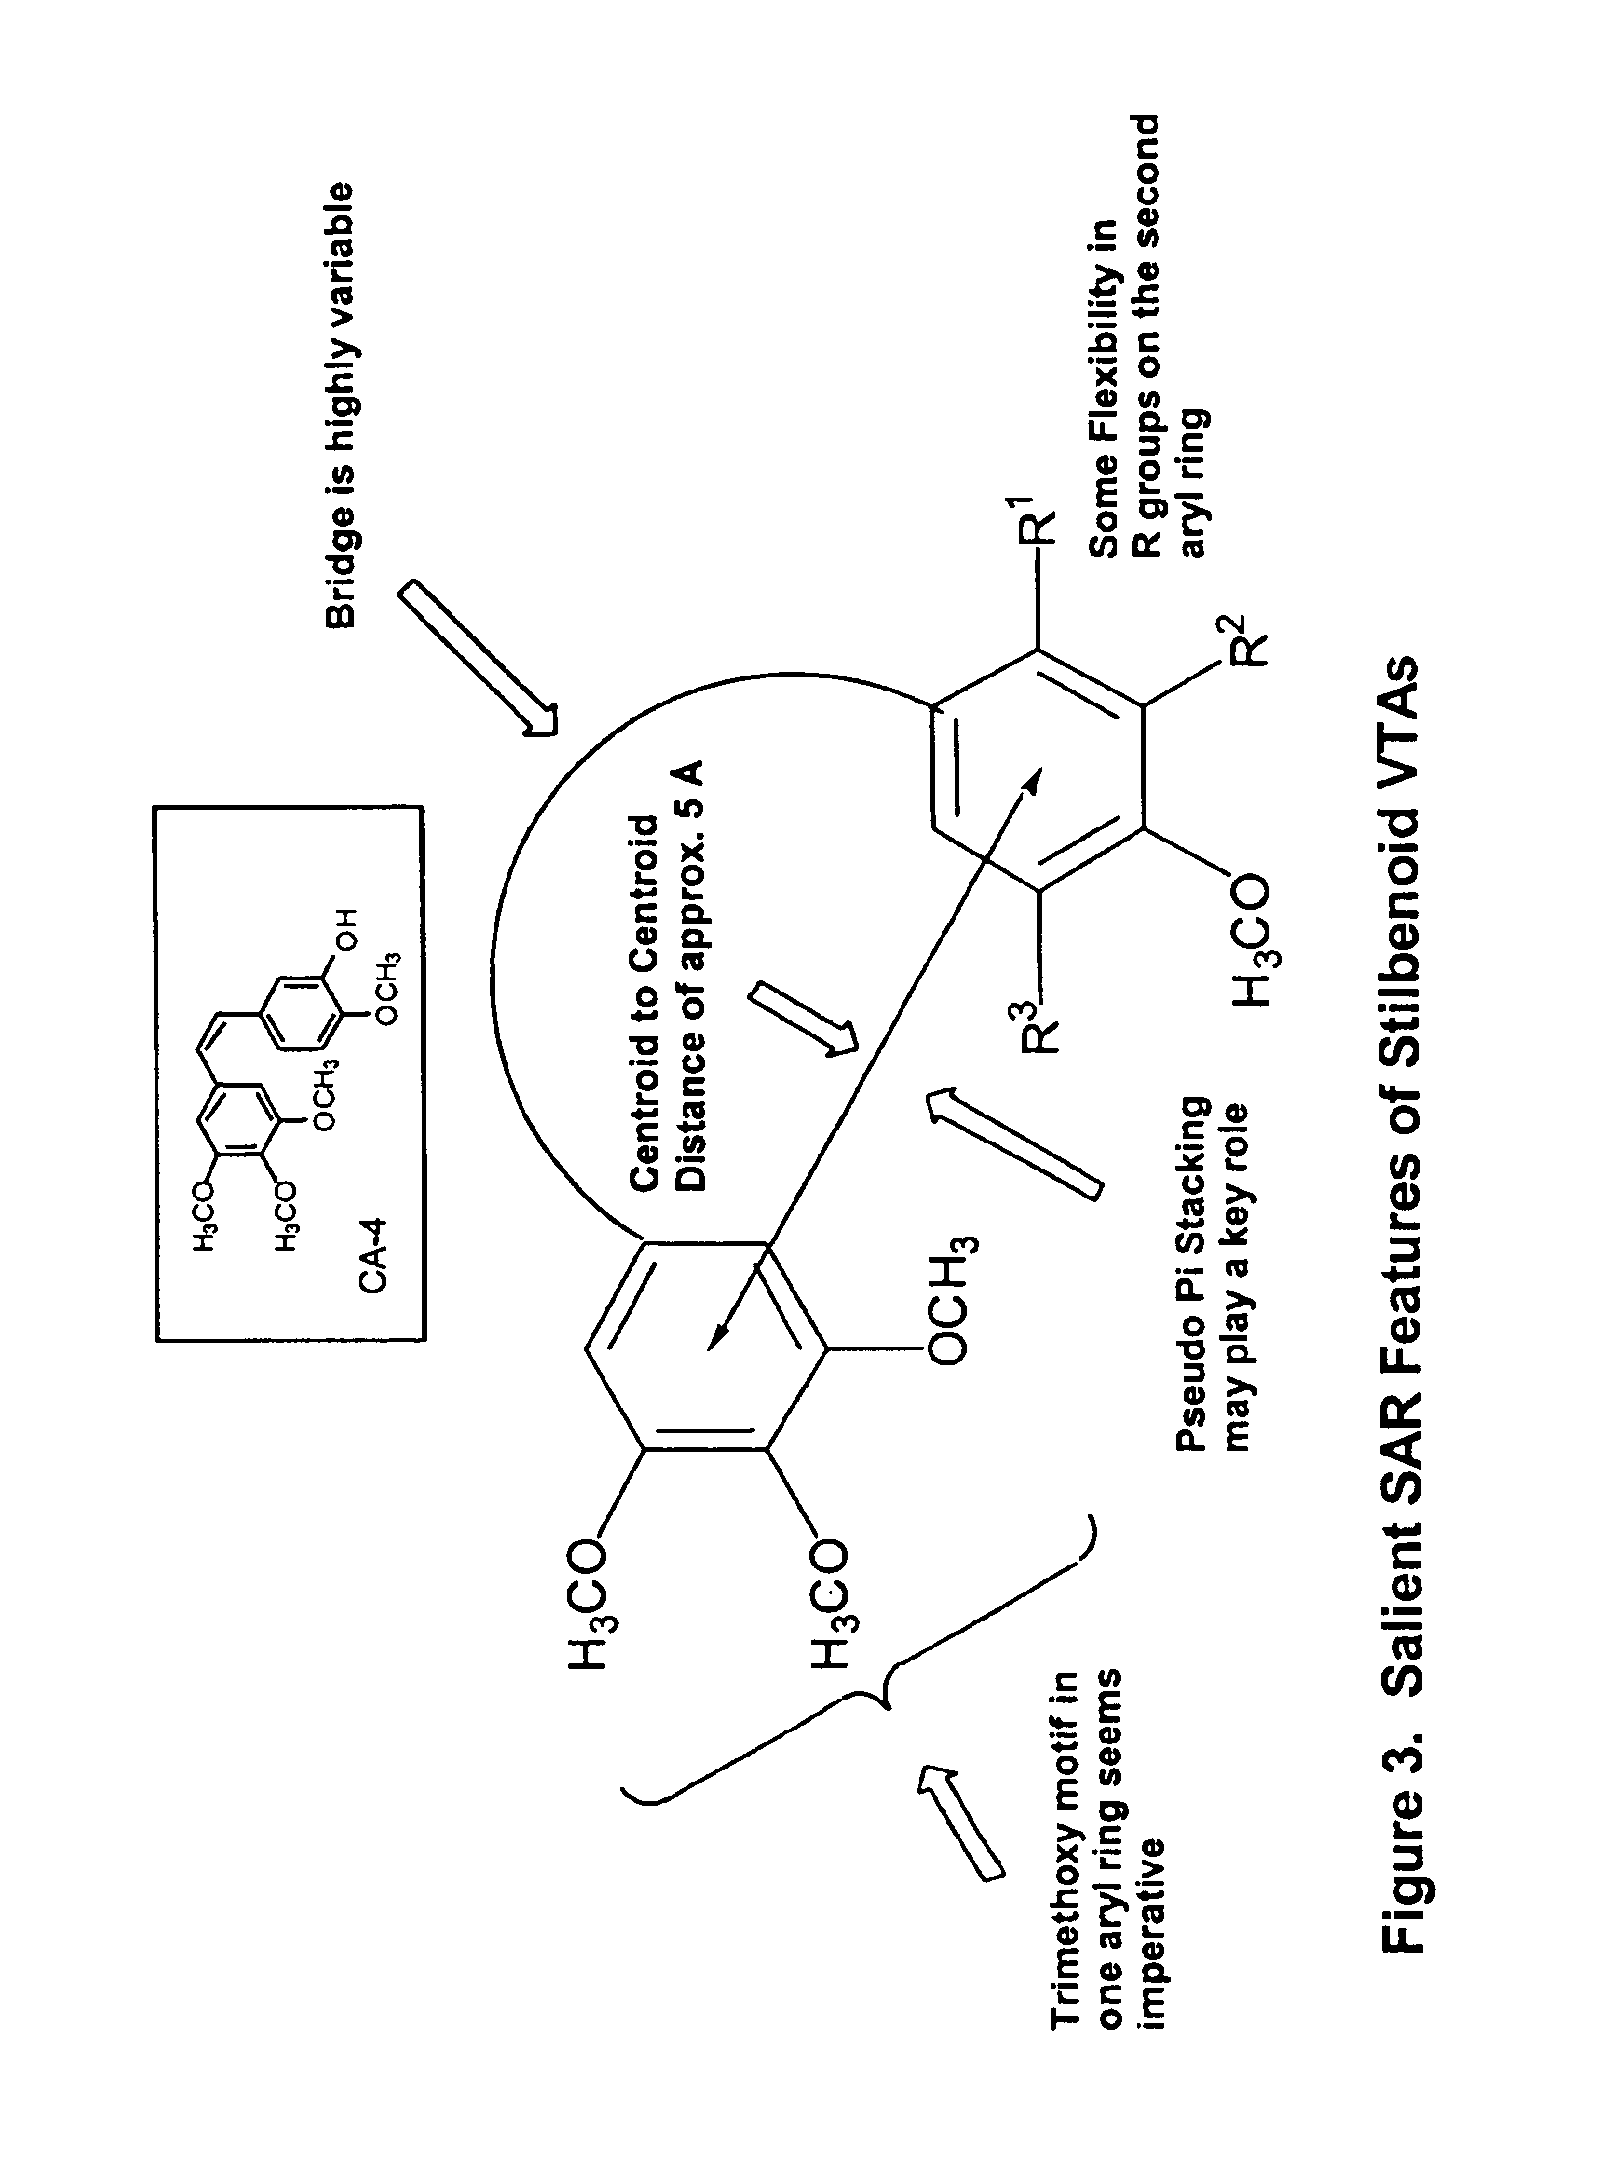 Functionalized stilbene derivatives as improved vascular targeting agents